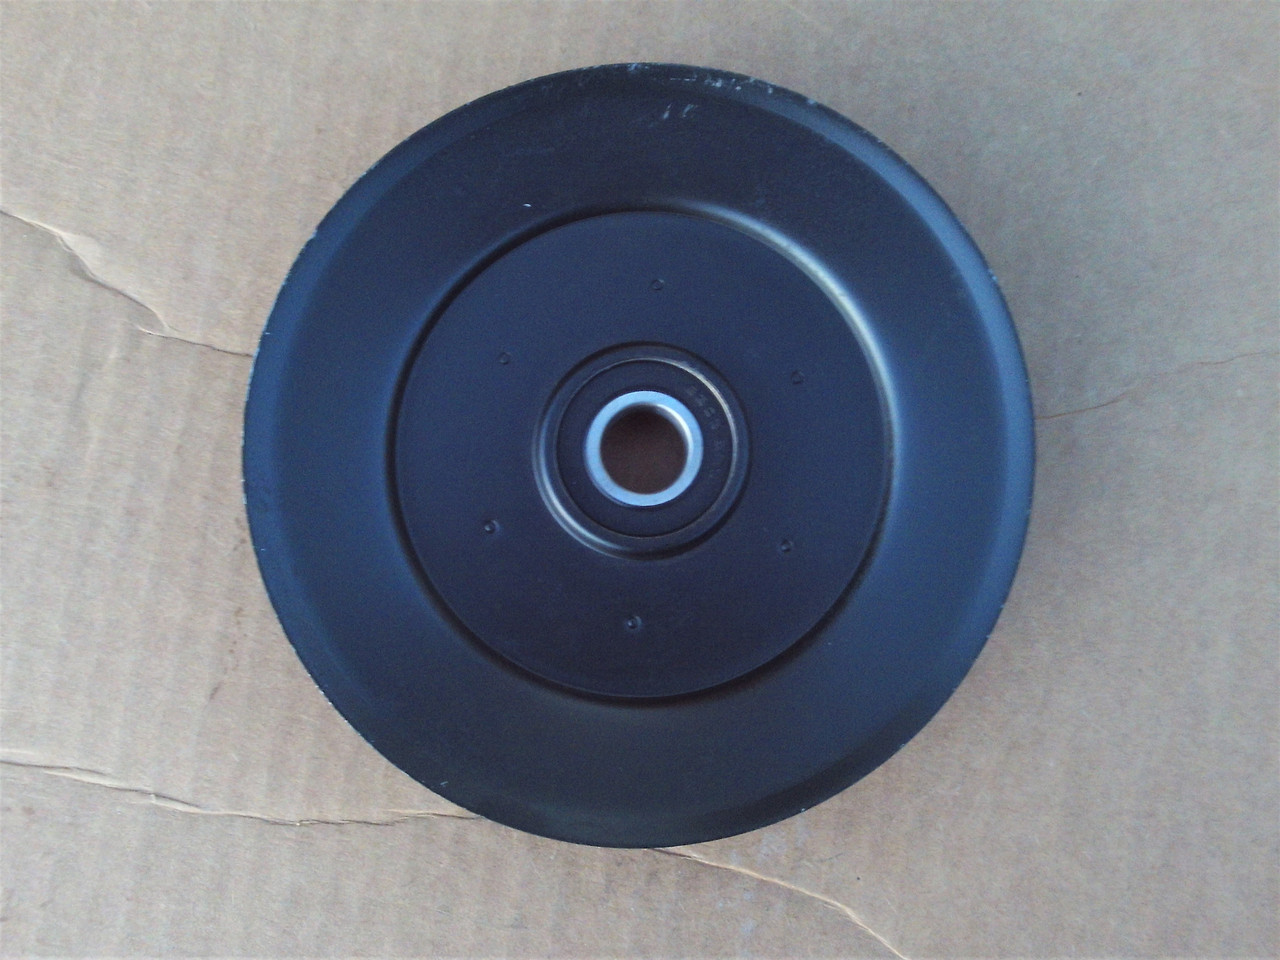 Pulley for Toro Timecutter Z 500's Z Master 1633166 633166 1-633166 Height: 1-1/8" ID: 5/8" OD: 6" time cutter